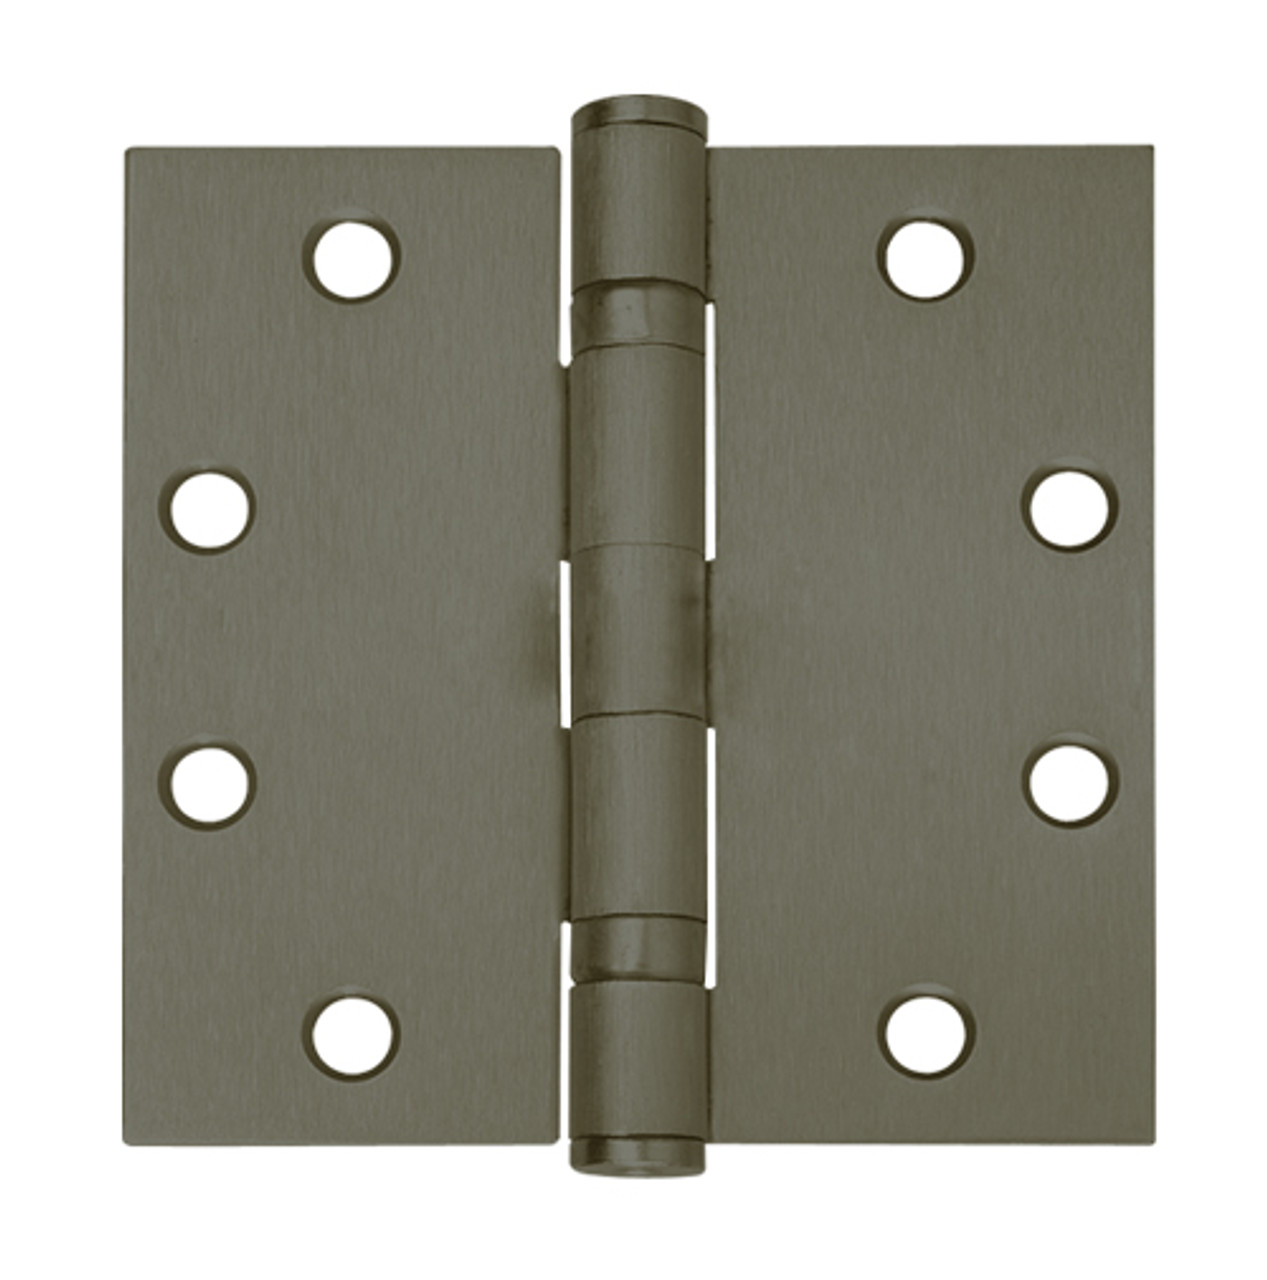 5BB1-4-5x4-613-TW4 IVES 5 Knuckle Ball Bearing Full Mortise Hinge with Electric Thru-Wire in Dark Bronze